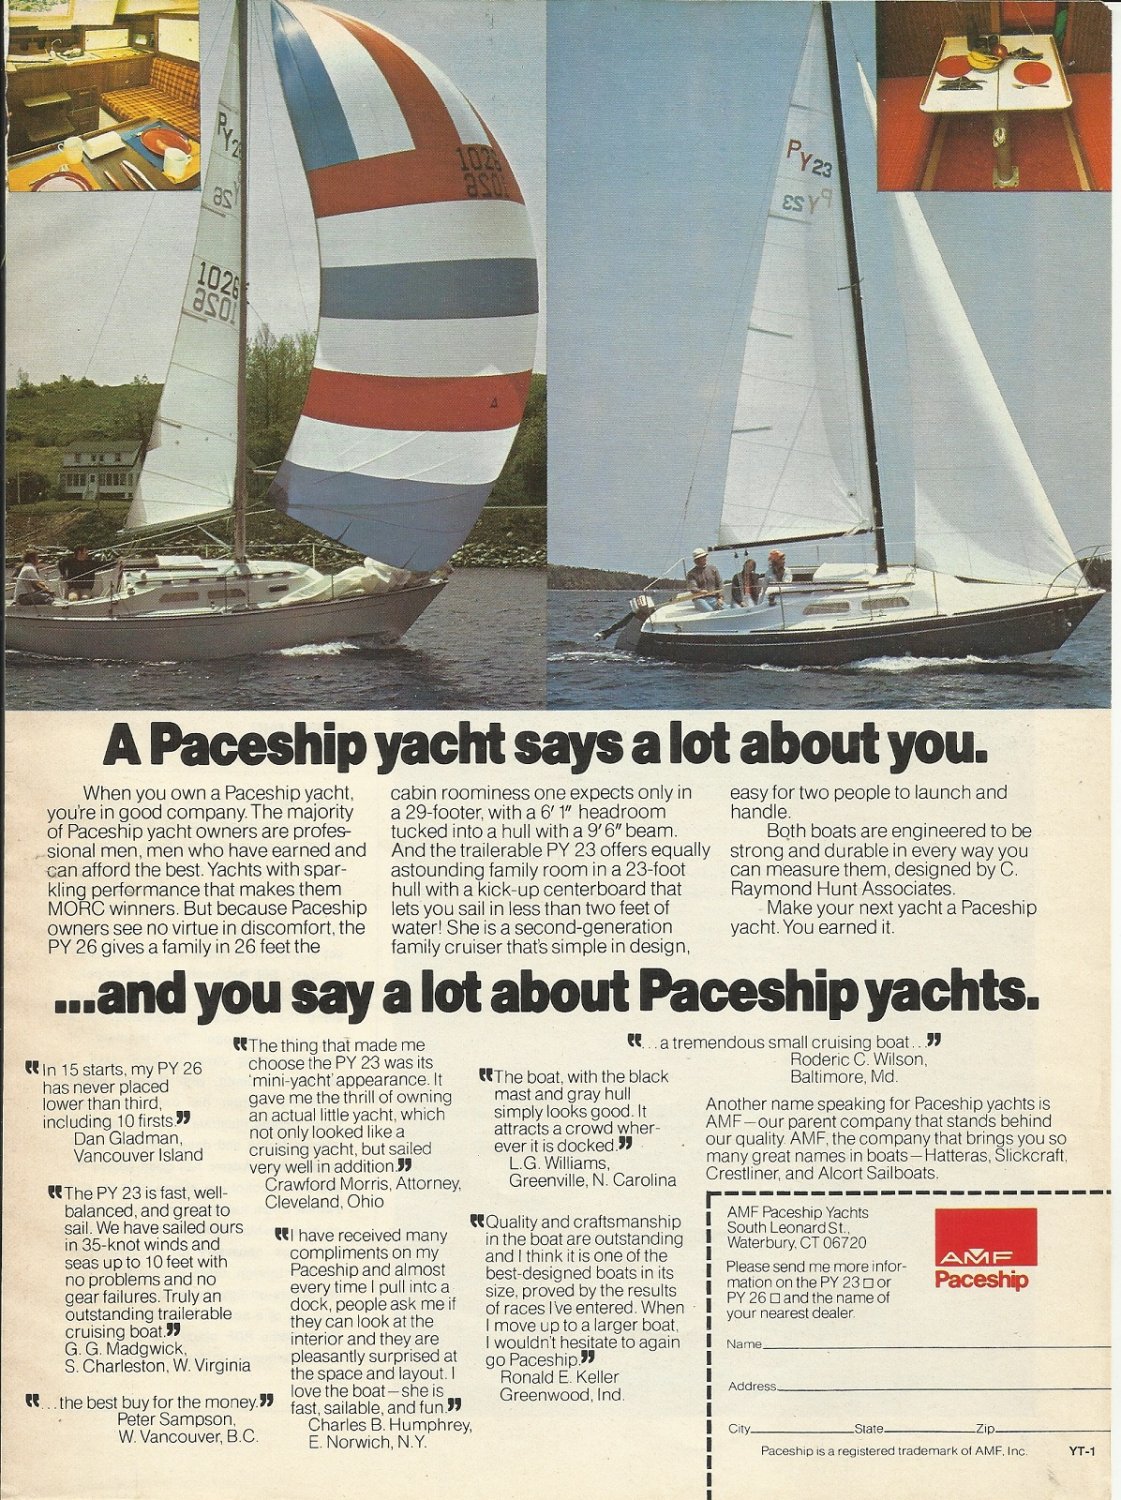 1975 AMF Paceship Yachts Color Ad- The PY 26 & PY 23